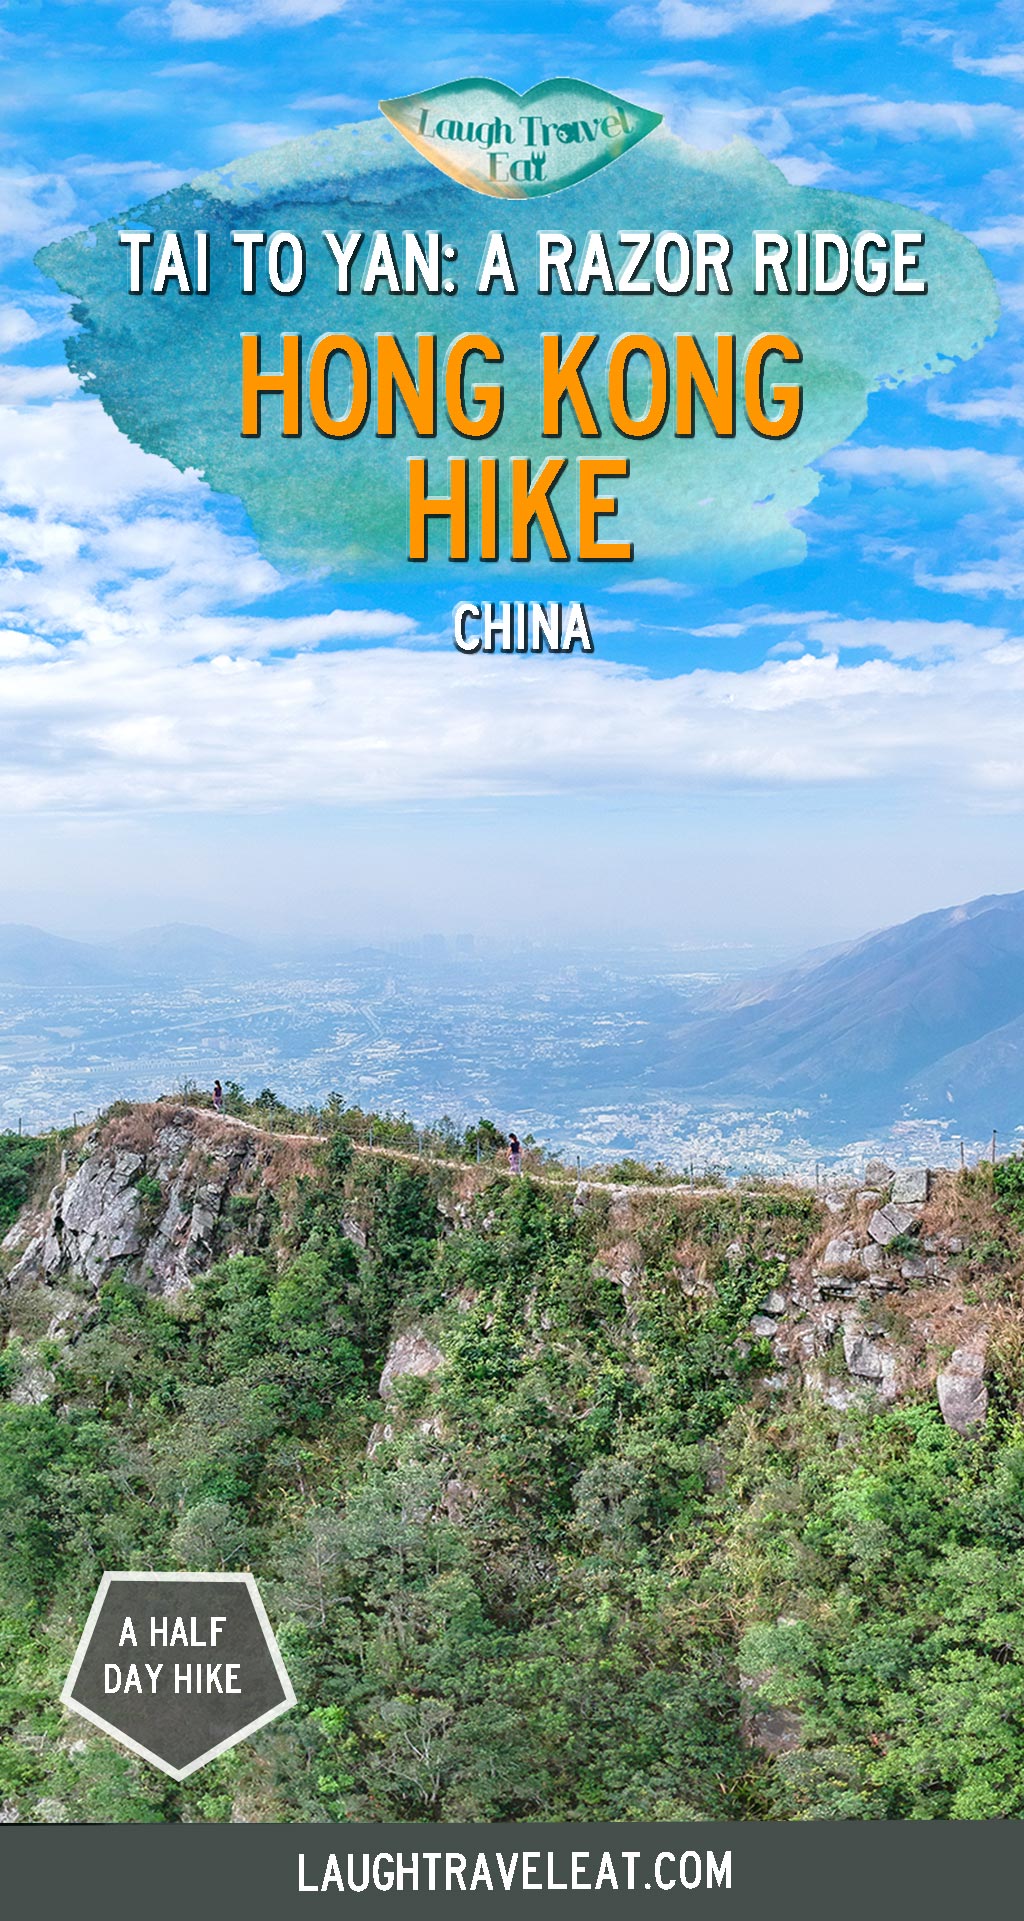 The razor ridge hike of Hong Kong, Tai To Yan trail in Tai Po is one of the most popular trails in the area, running roughly north to south and offering a panorama of New Territories and even Shenzhen east and west of it. It is a good hike that can be done in half a day and here's how to hike it #hongkong #hike